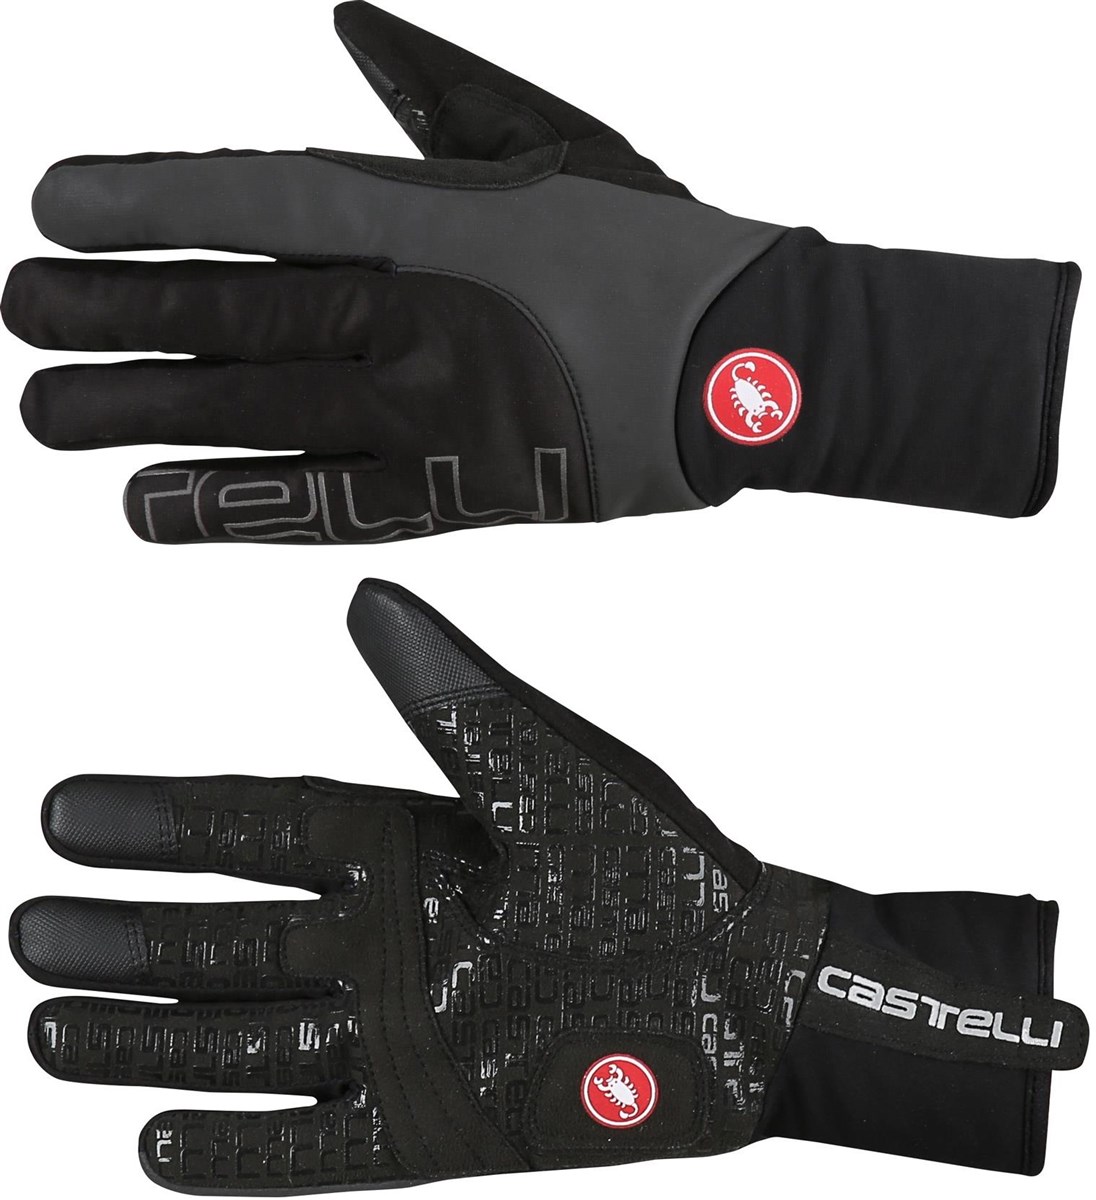 Castelli Tempesta 2 Long Finger Cycling Glove product image